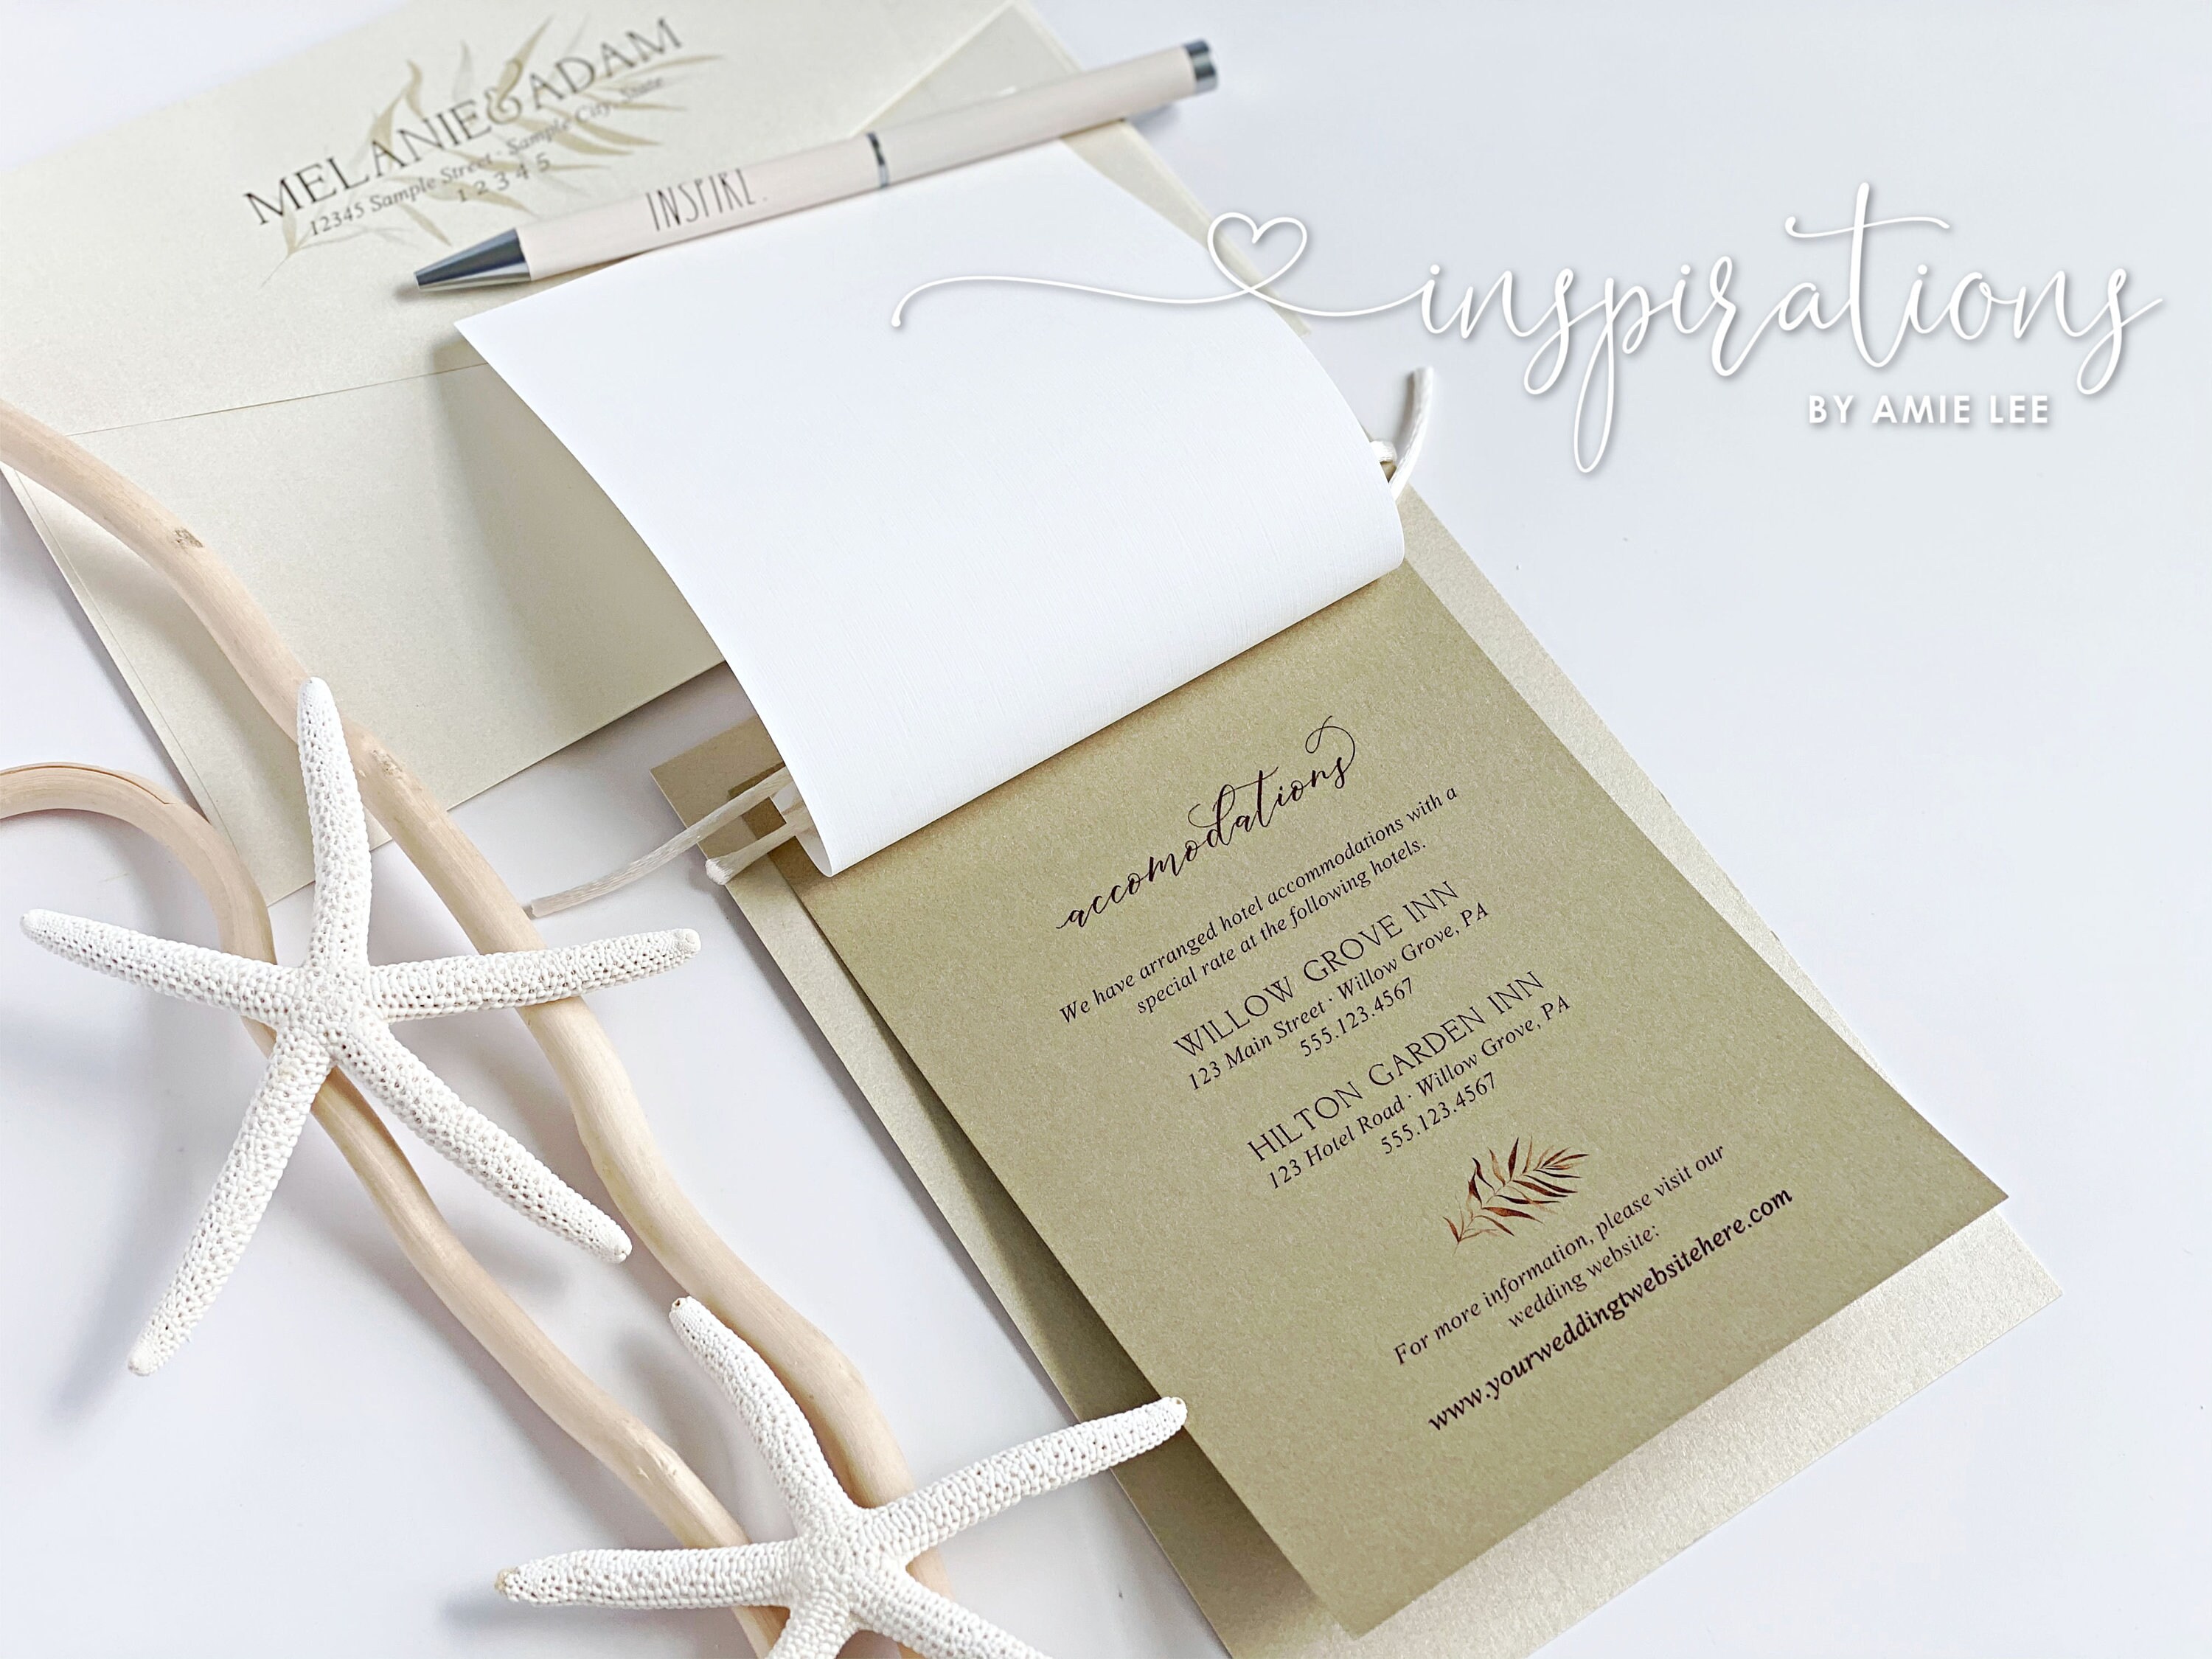 100pcs Ocean Theme Wedding Invitation Scroll Invitations with Natural  Starfish Shells Conches Decorations HI2056 Free Shipping - AliExpress